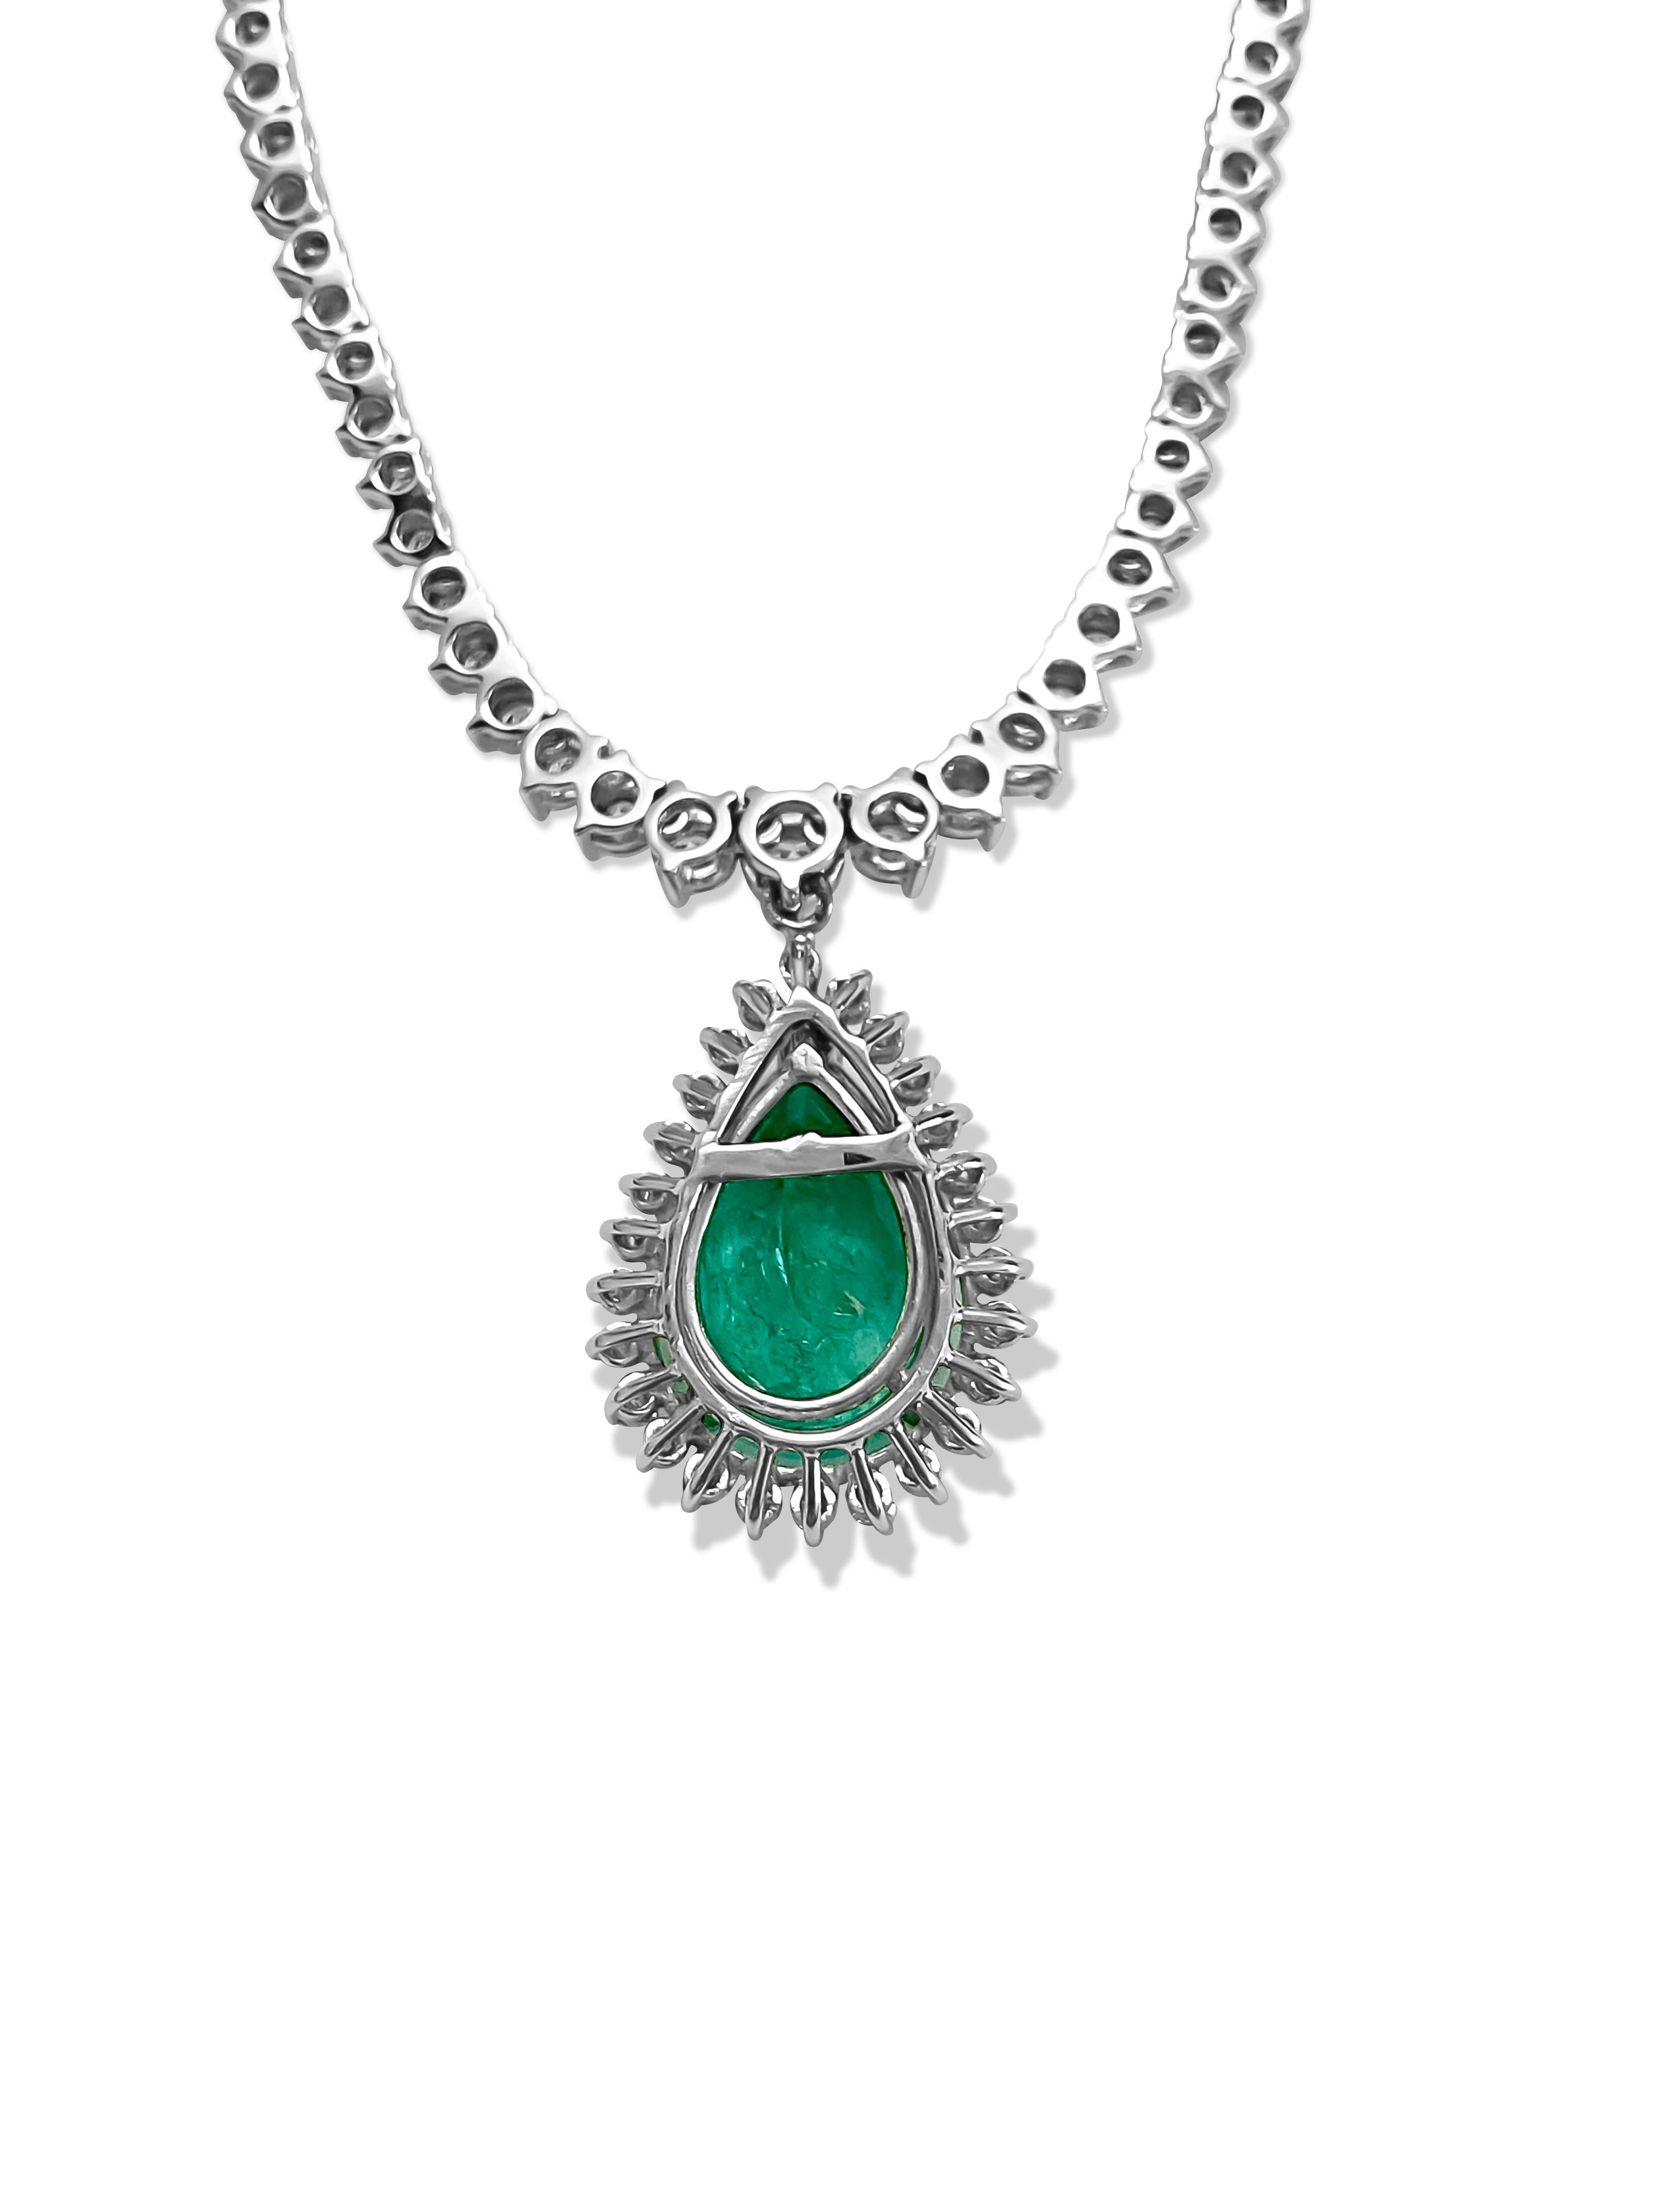 Certified 12.00 Carat Colombian Emerald Diamond Necklace 14 Karat White Gold In New Condition For Sale In Miami, FL